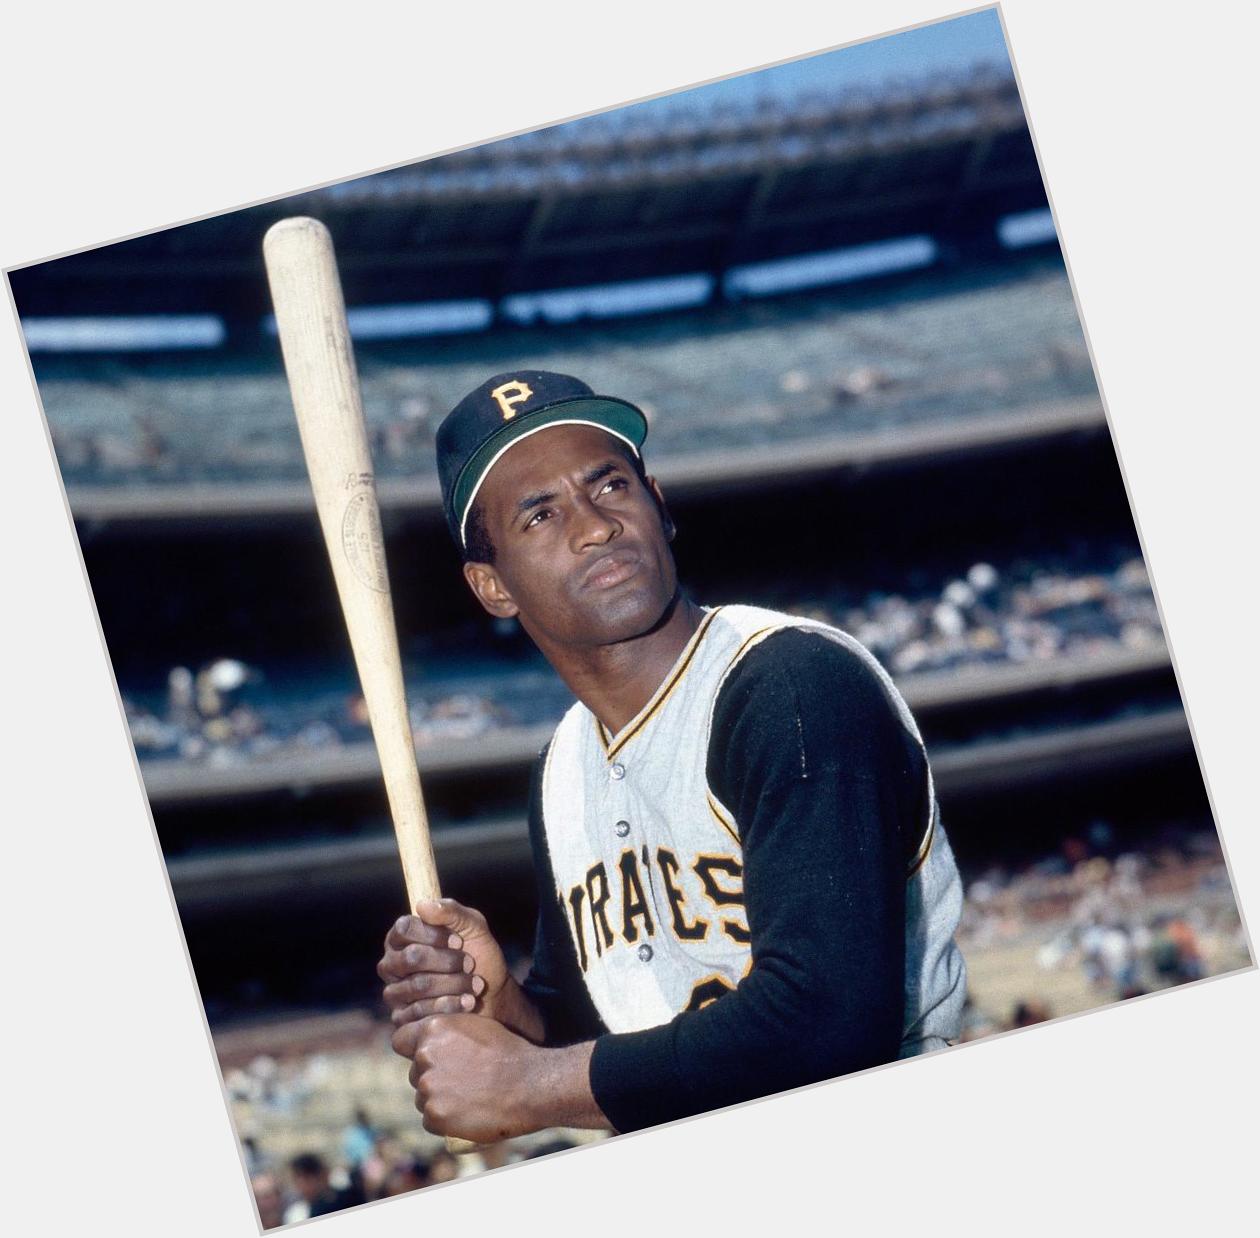 The Great One Happy birthday to great Roberto Clemente. Today he would\ve been 81. 